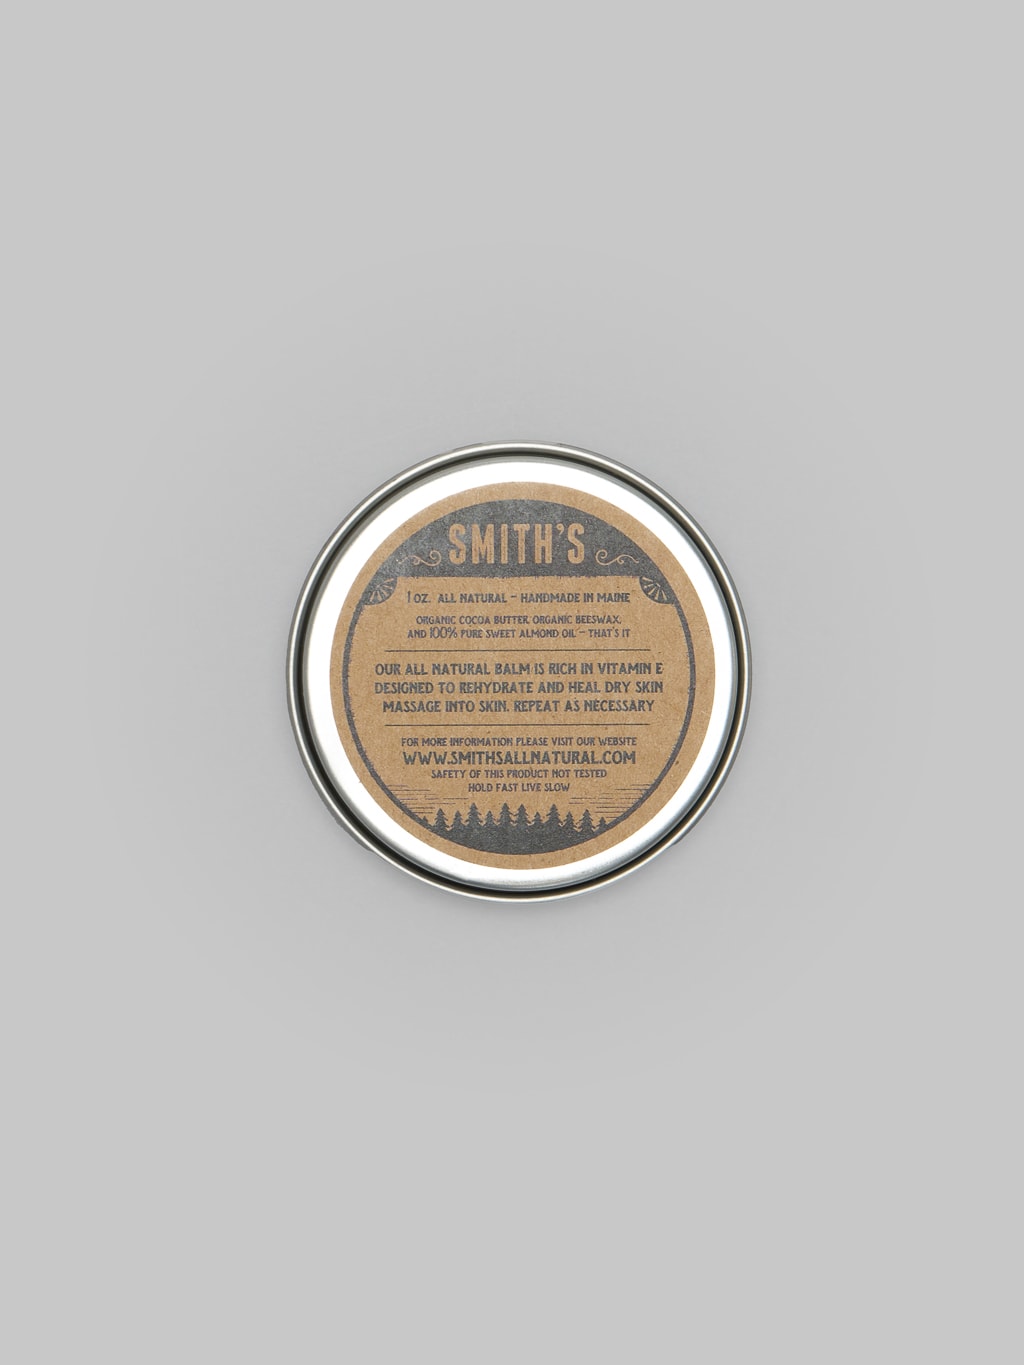 Smith s Hand and Body Balm ingredients explaining